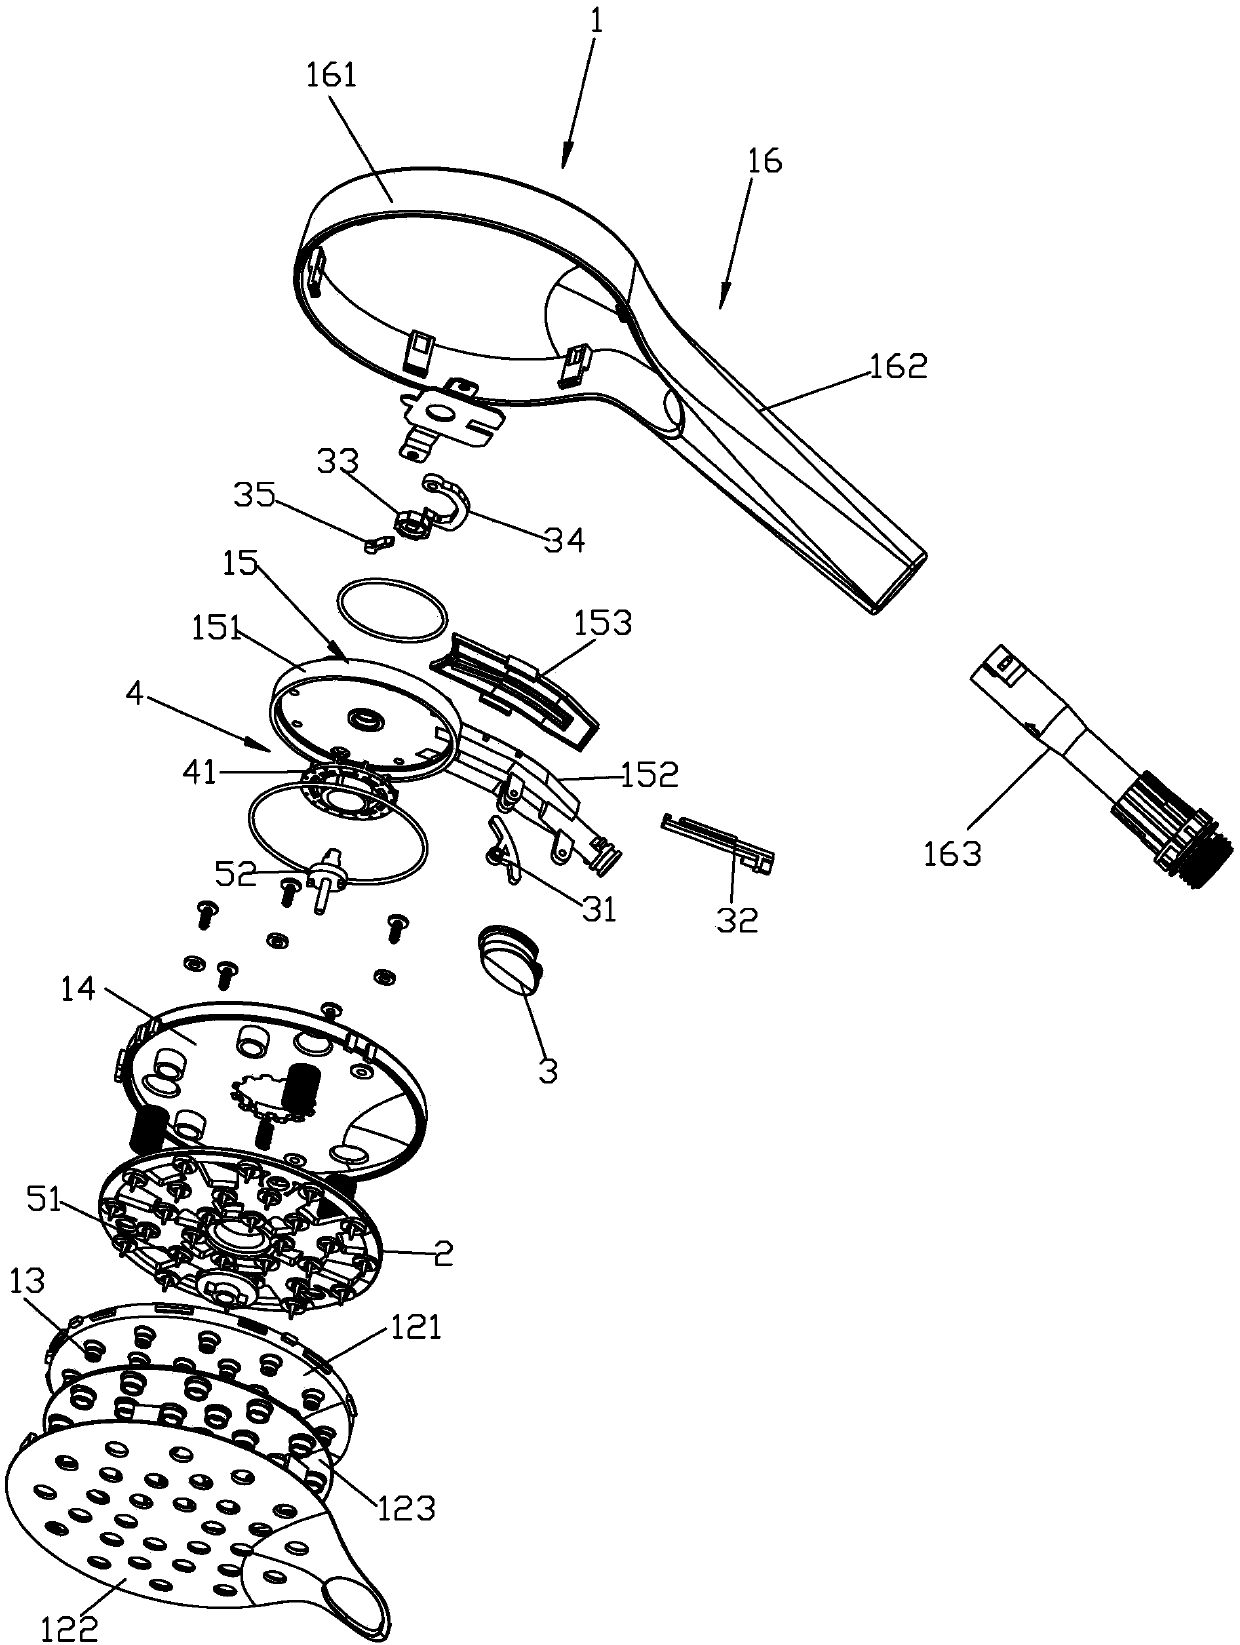 Shower head with same water outlet nozzle capable of discharging different water flowers